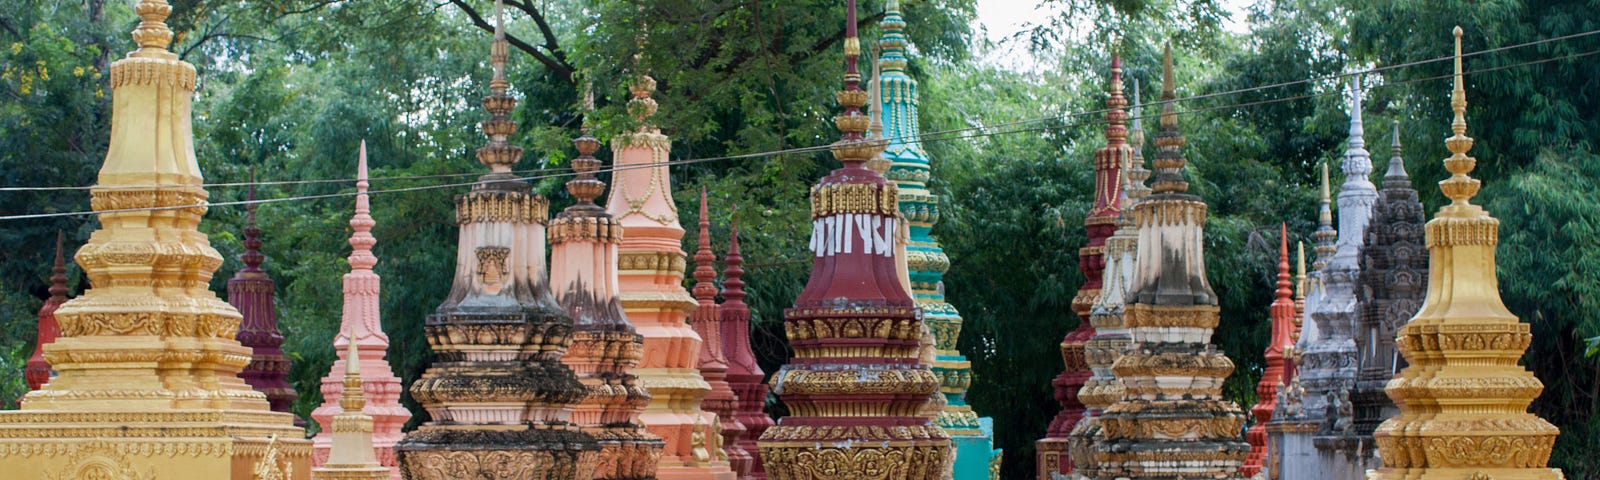 small stupa or temples in Asia